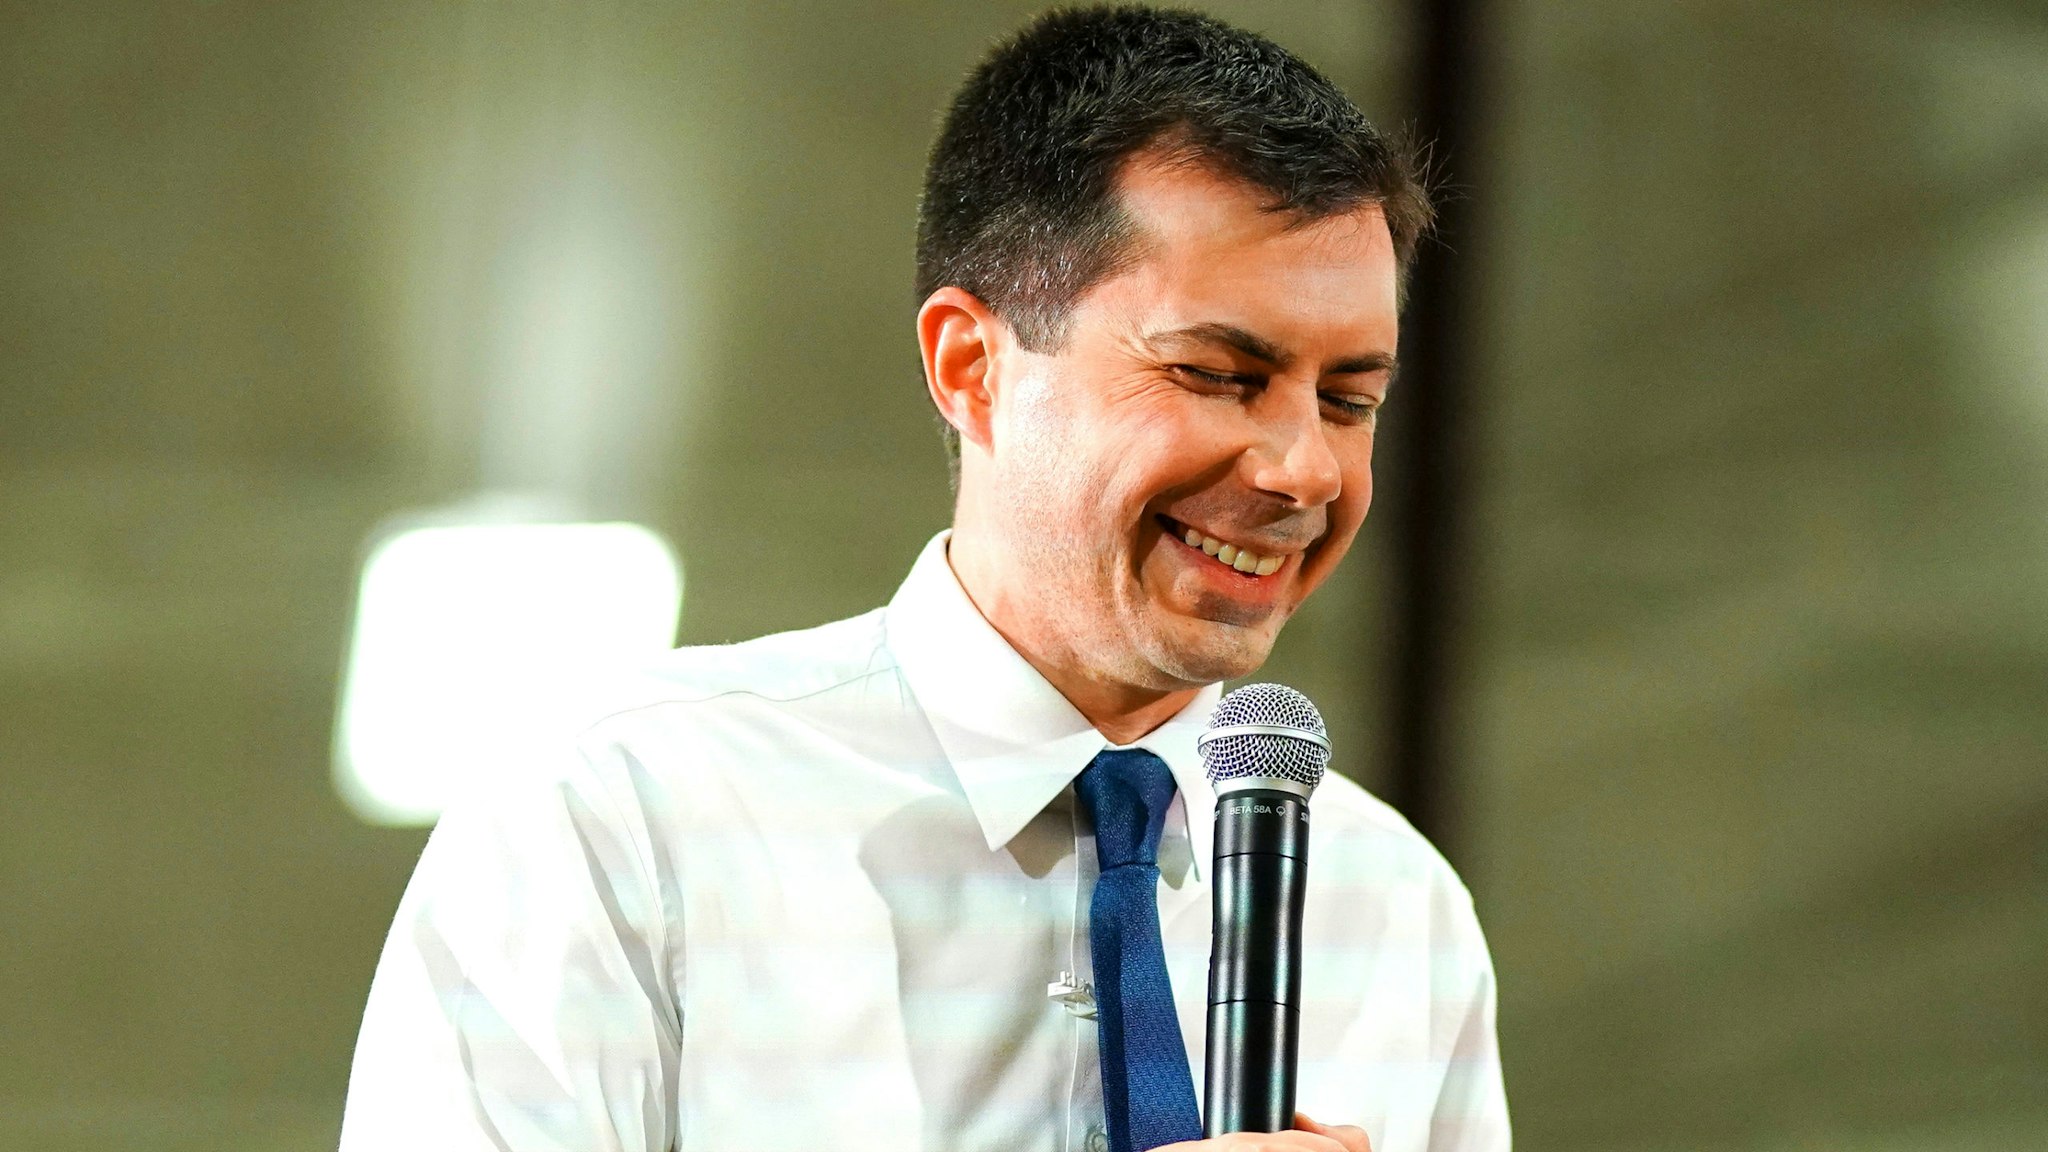 Pete Buttigieg, former mayor of South Bend and 2020 presidential candidate, laughs while speaking at a campaign event in Des Moines, Iowa, U.S., on Sunday, Feb. 2, 2020. Buttigieg's top campaign staff took veiled shots at Iowa front-runners Bernie Sanders and Joe Biden, reflecting the candidate's argument that it's time for a fresh start in Washington.